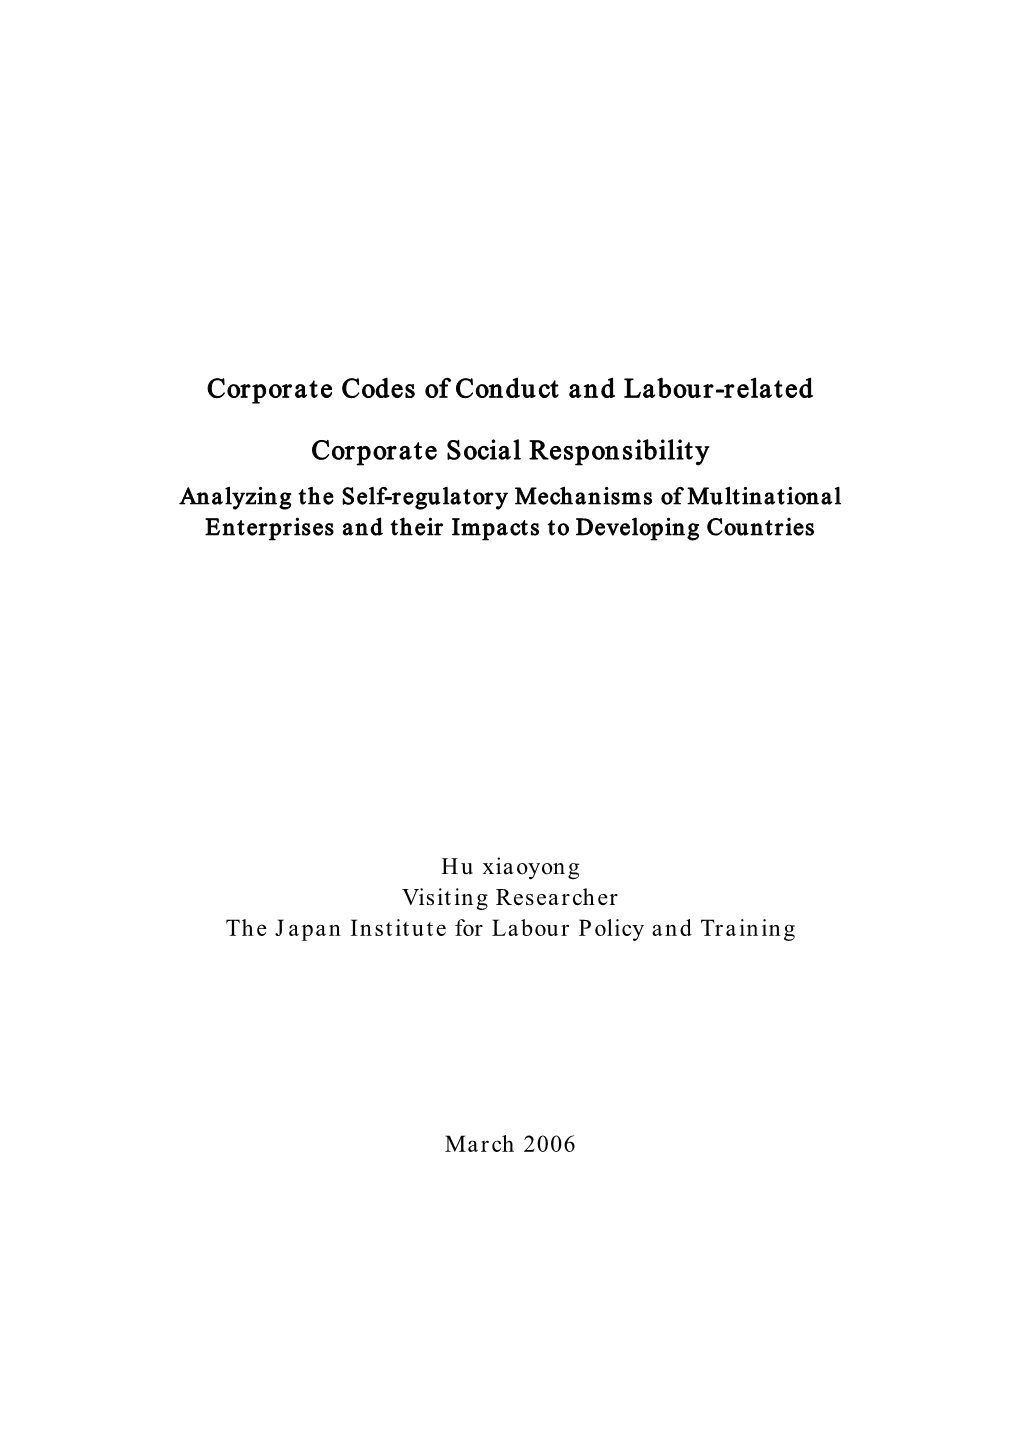 Corporate Codes of Conduct and Labour-Related Corporate Social